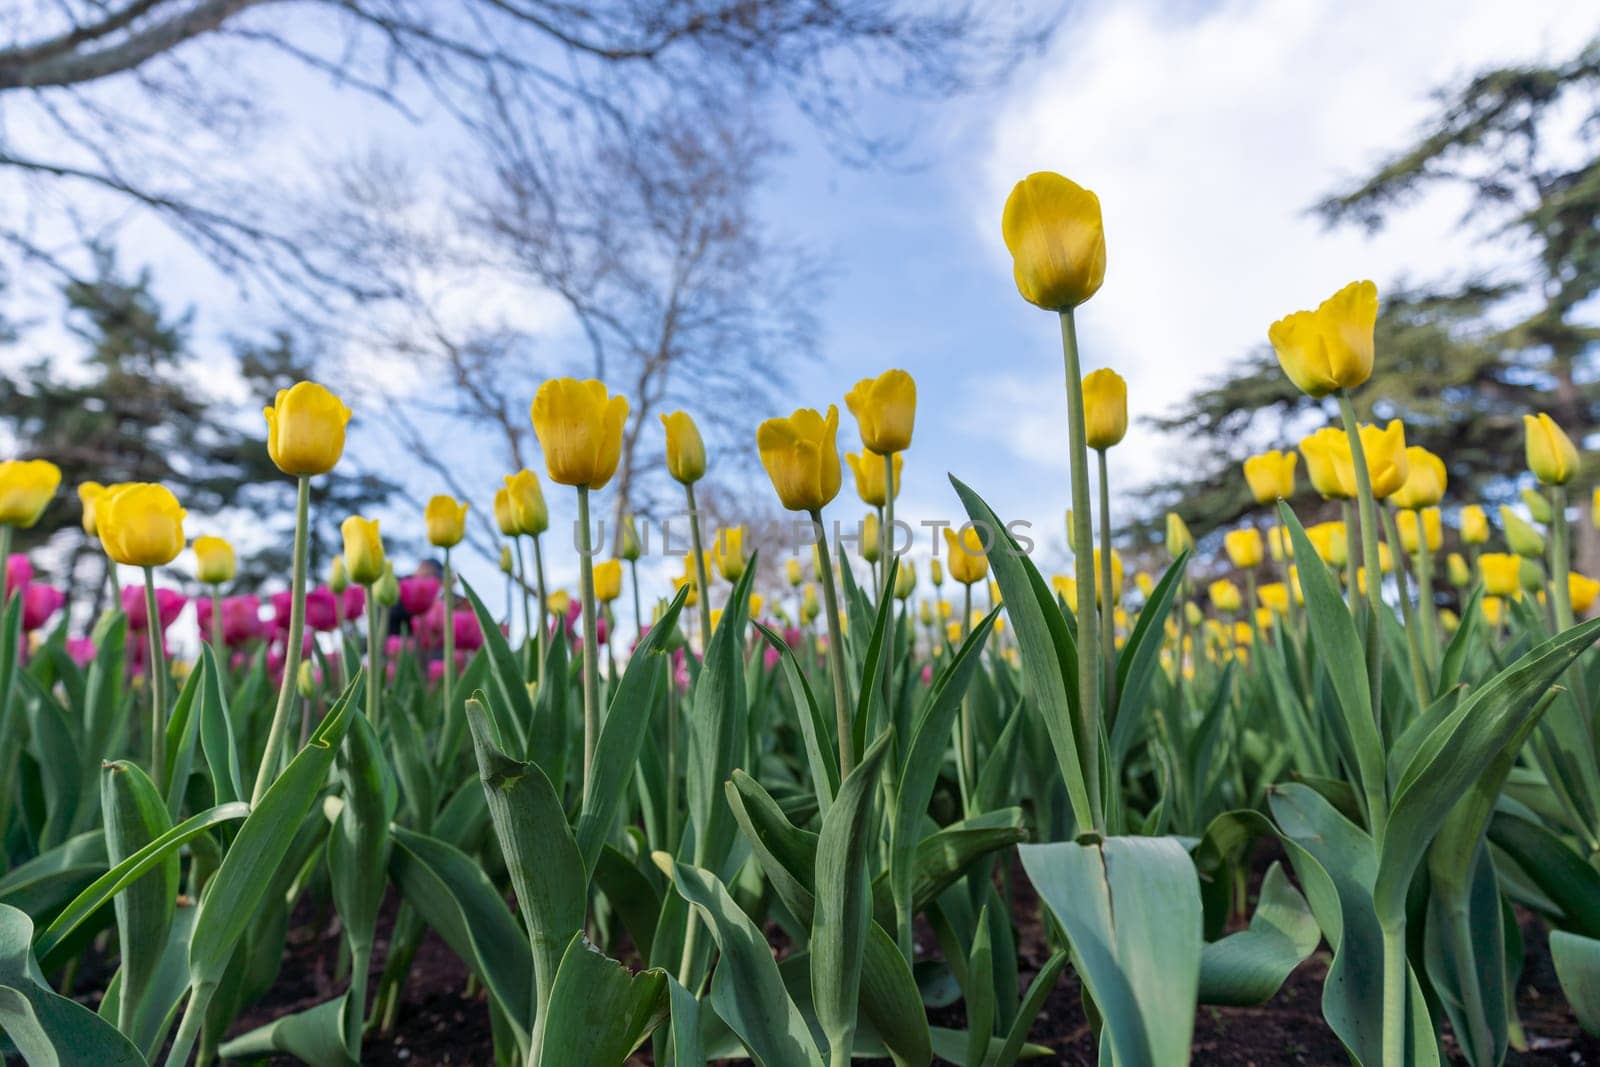 Tulips in a flower bed, yellow and pink flowers against the sky and trees, spring flowers. by Matiunina